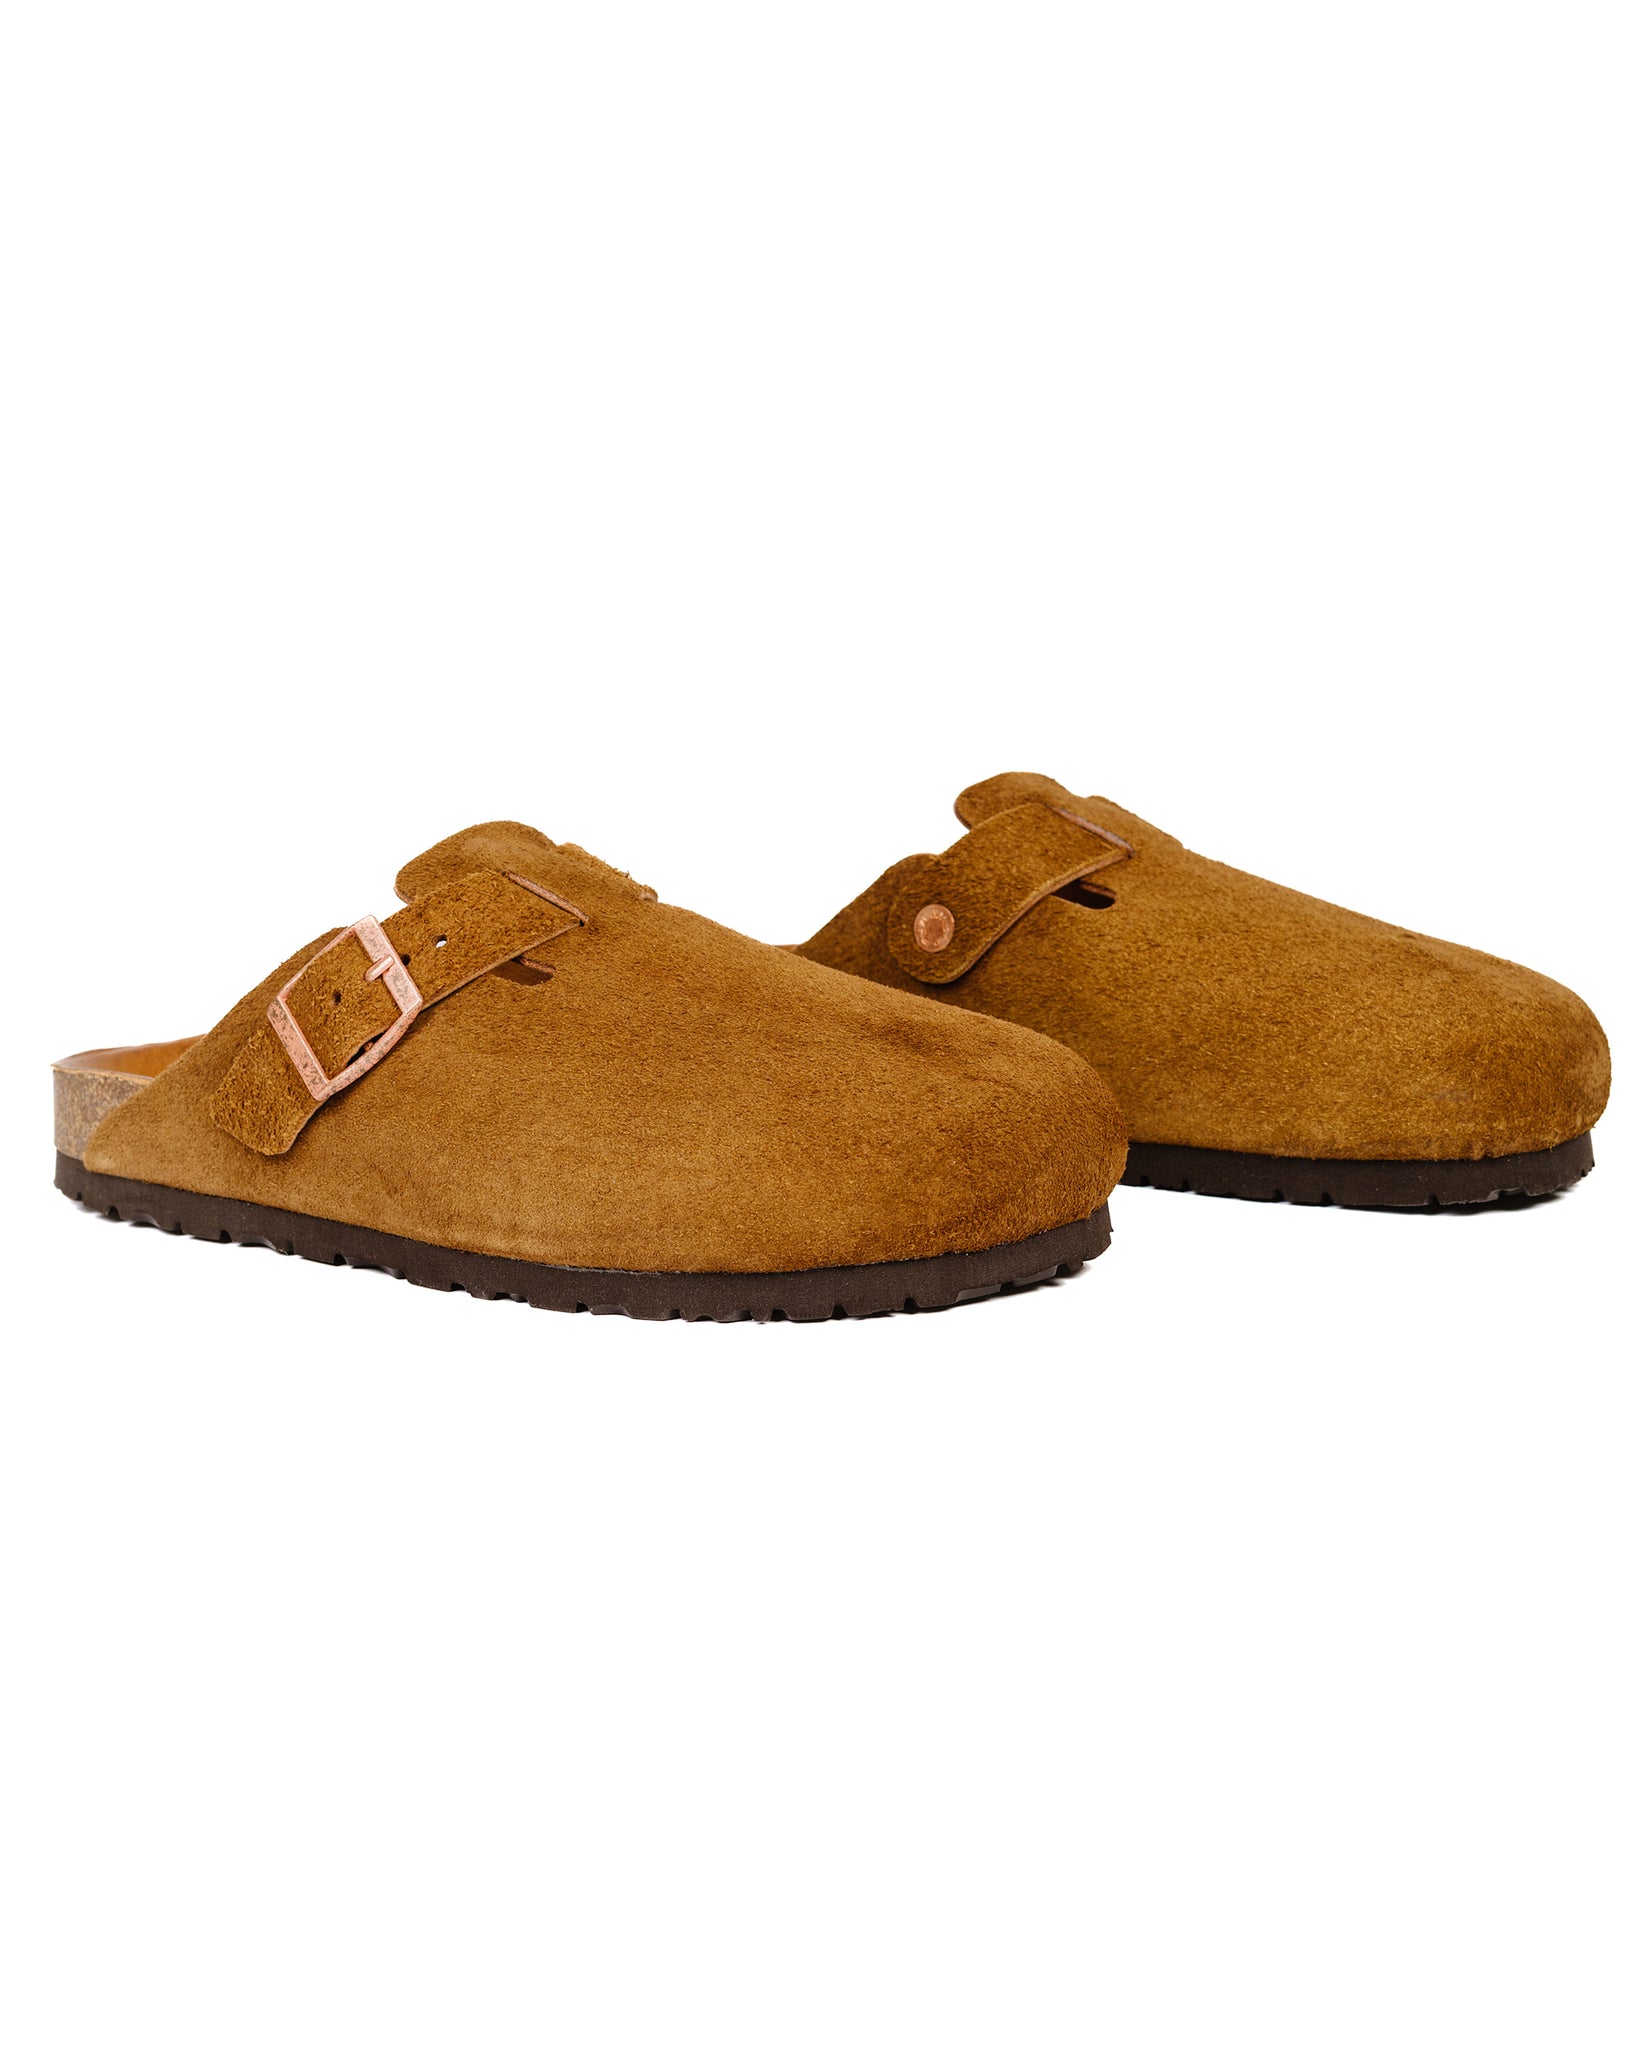 The Real McCoy's MA23012 Leather Foot-Support Clogs Raw Sienna